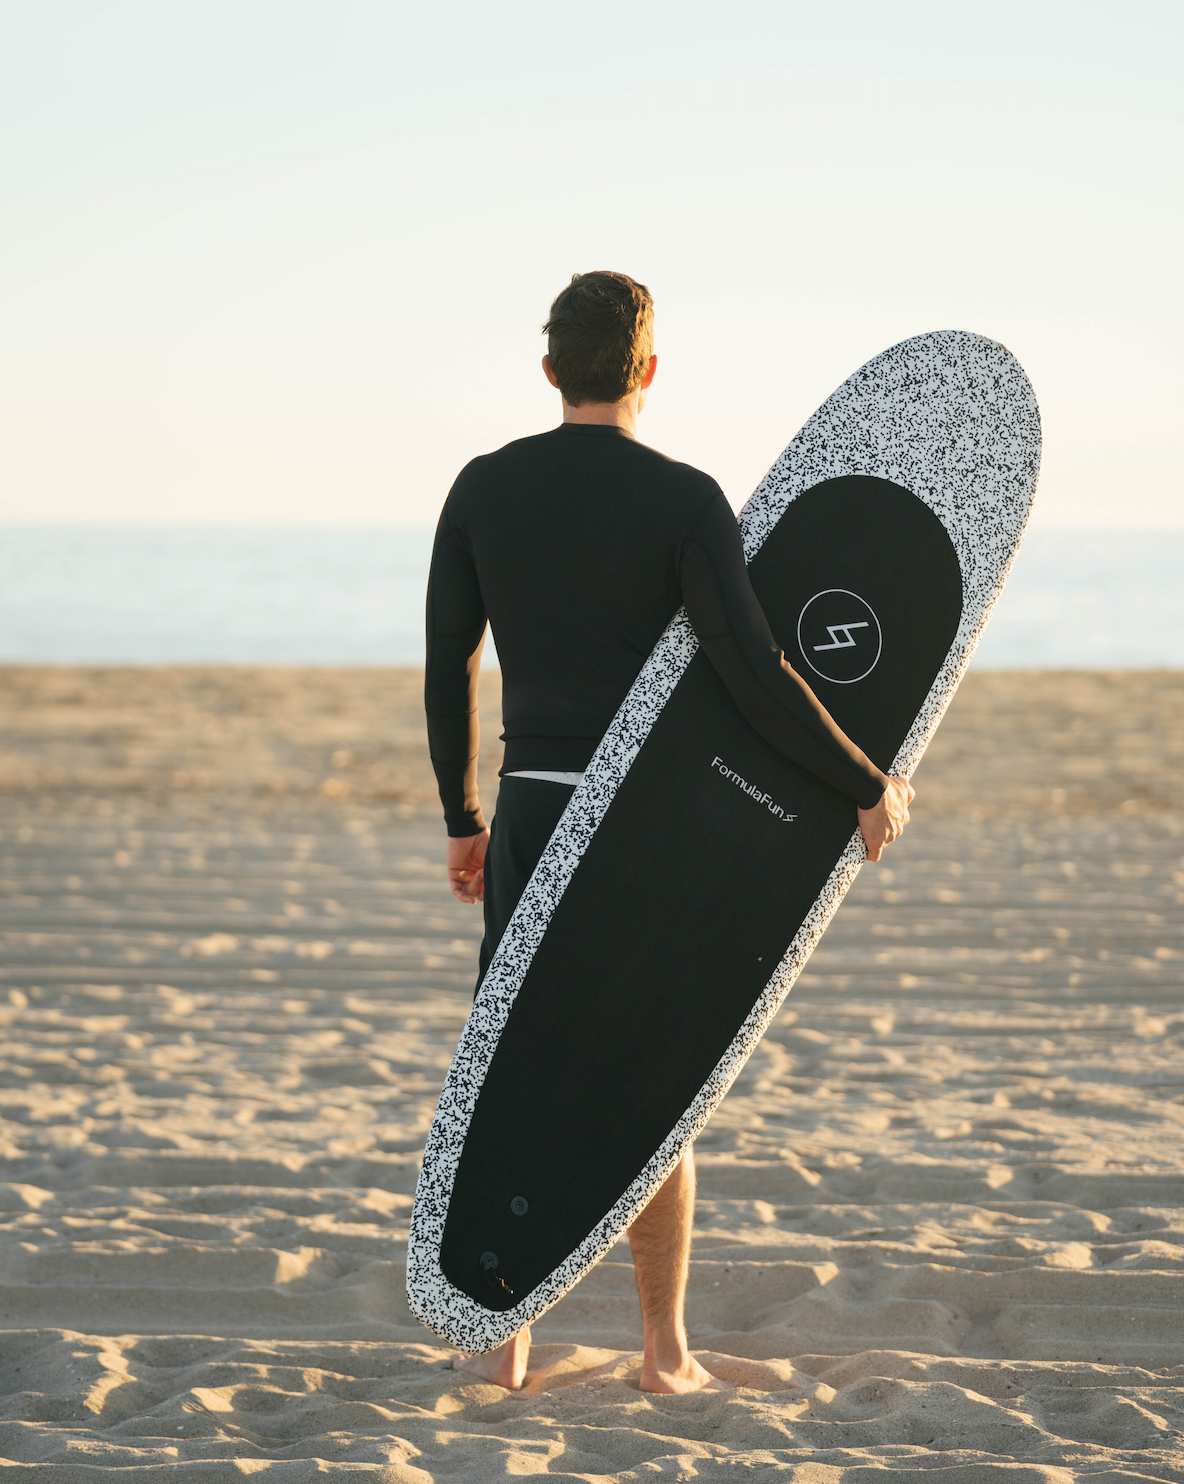 Man on a beach in a wetsuit with a speckled 6 foot 4 inch Formula Fun Foamies Zipper surfboard